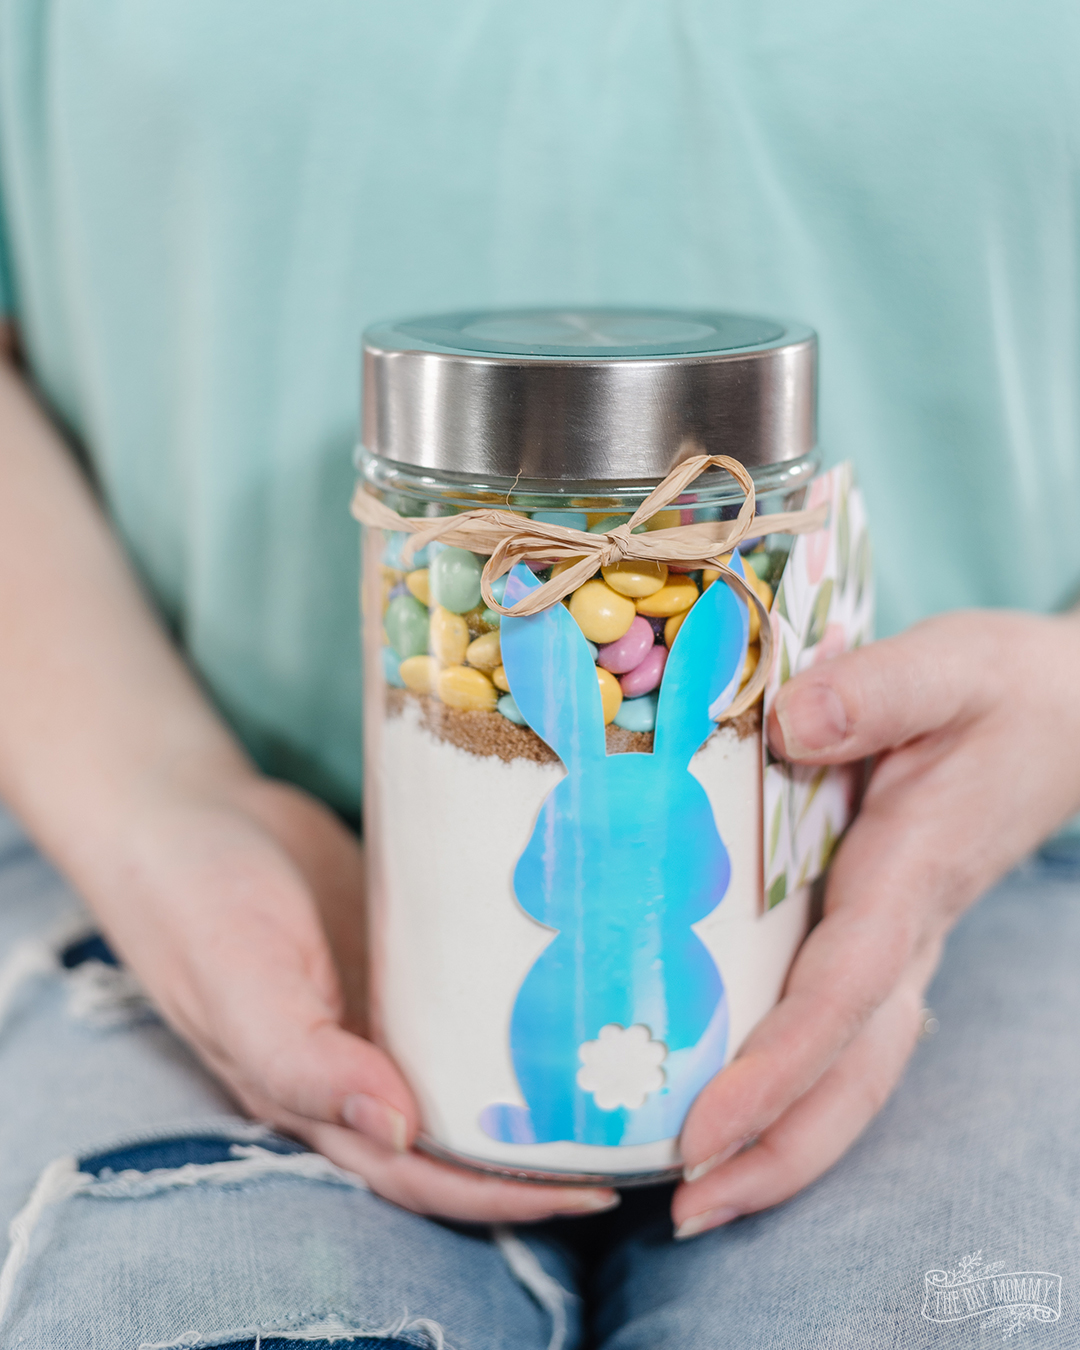 Learn how to make these simple Easter cookies in a jar for a festive gift. So cute and easy!